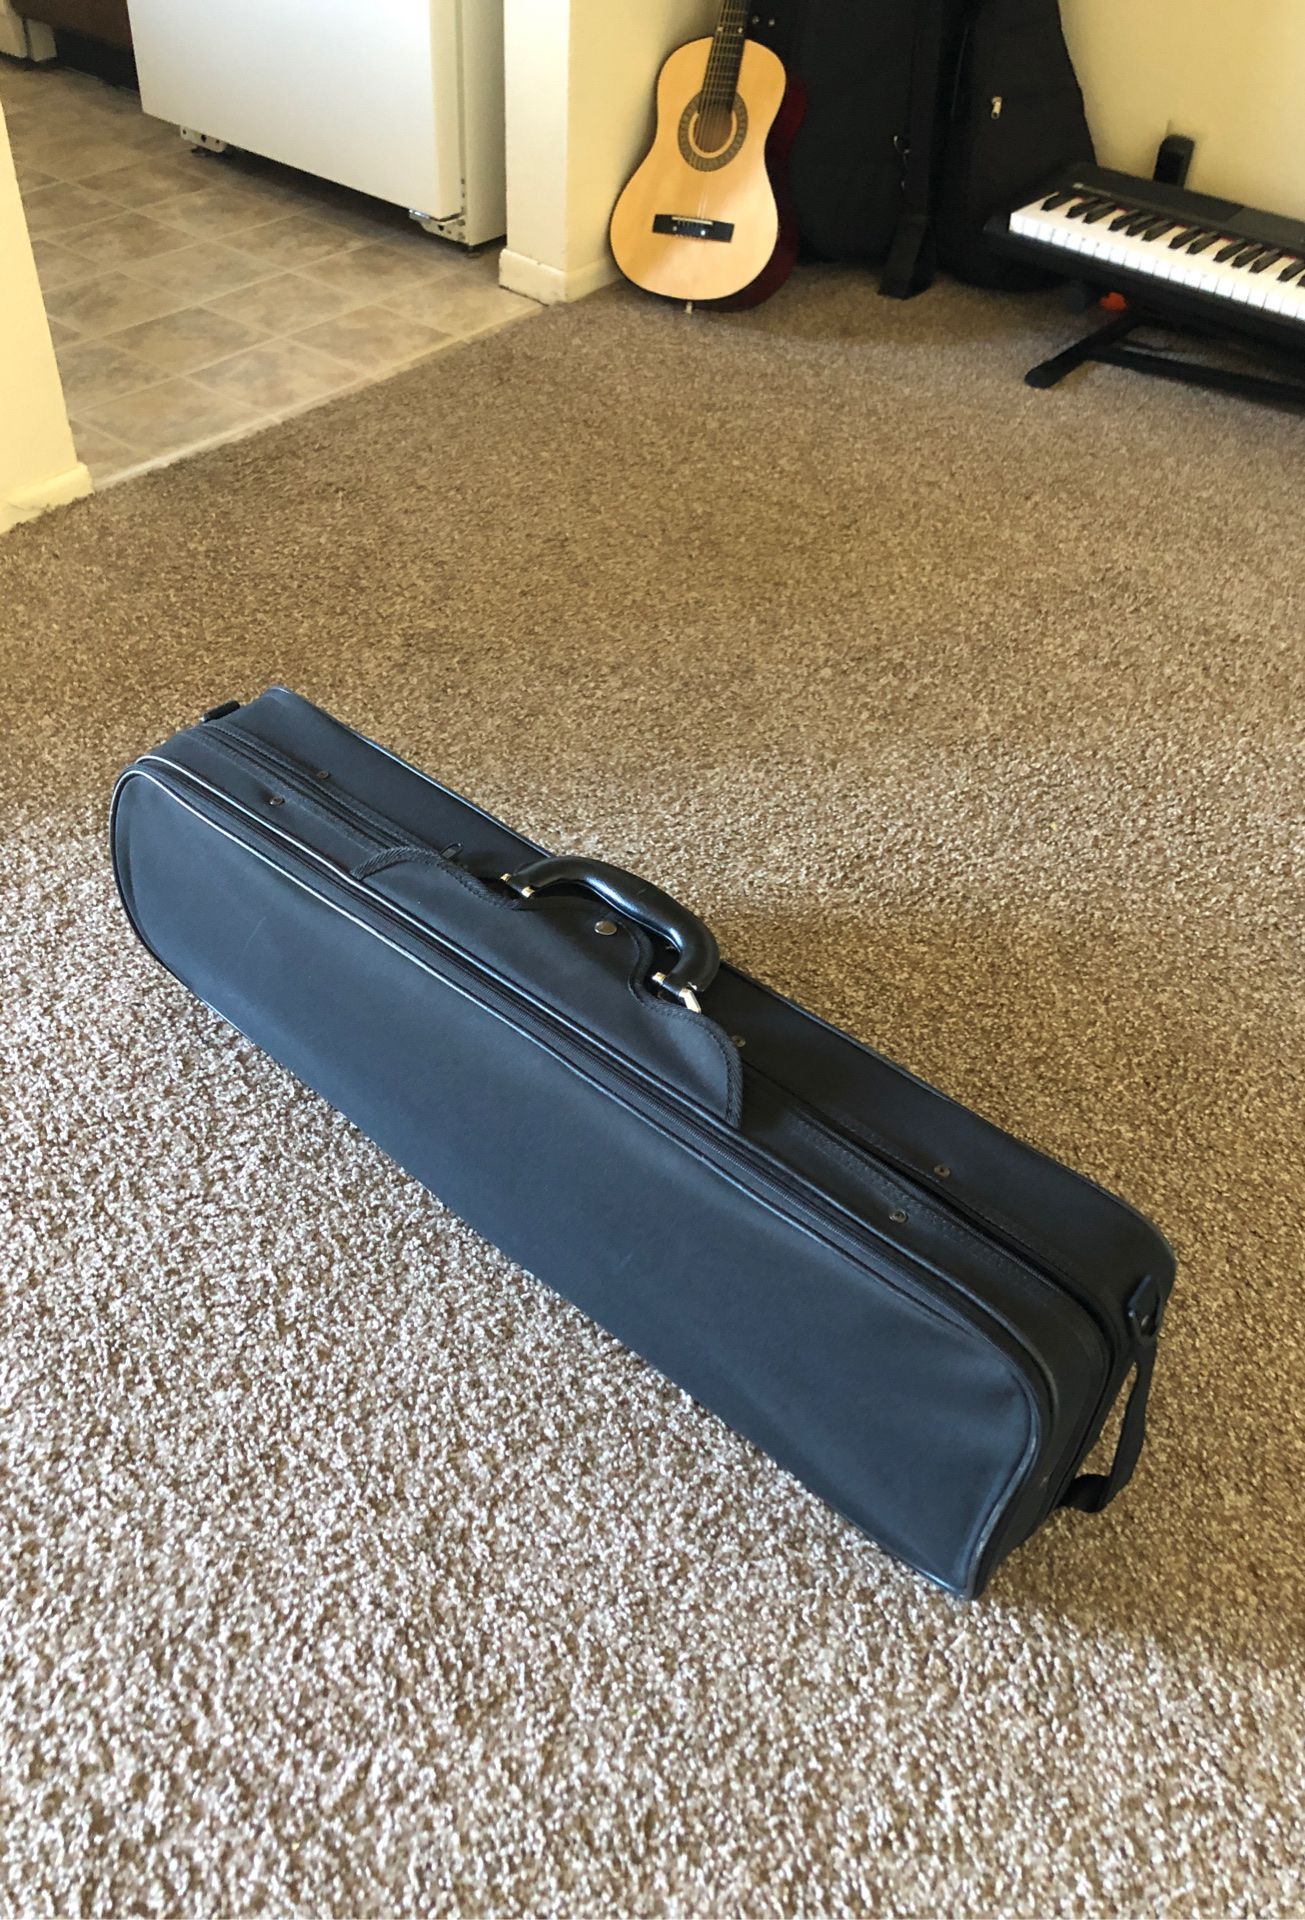 MoMentum violin with case